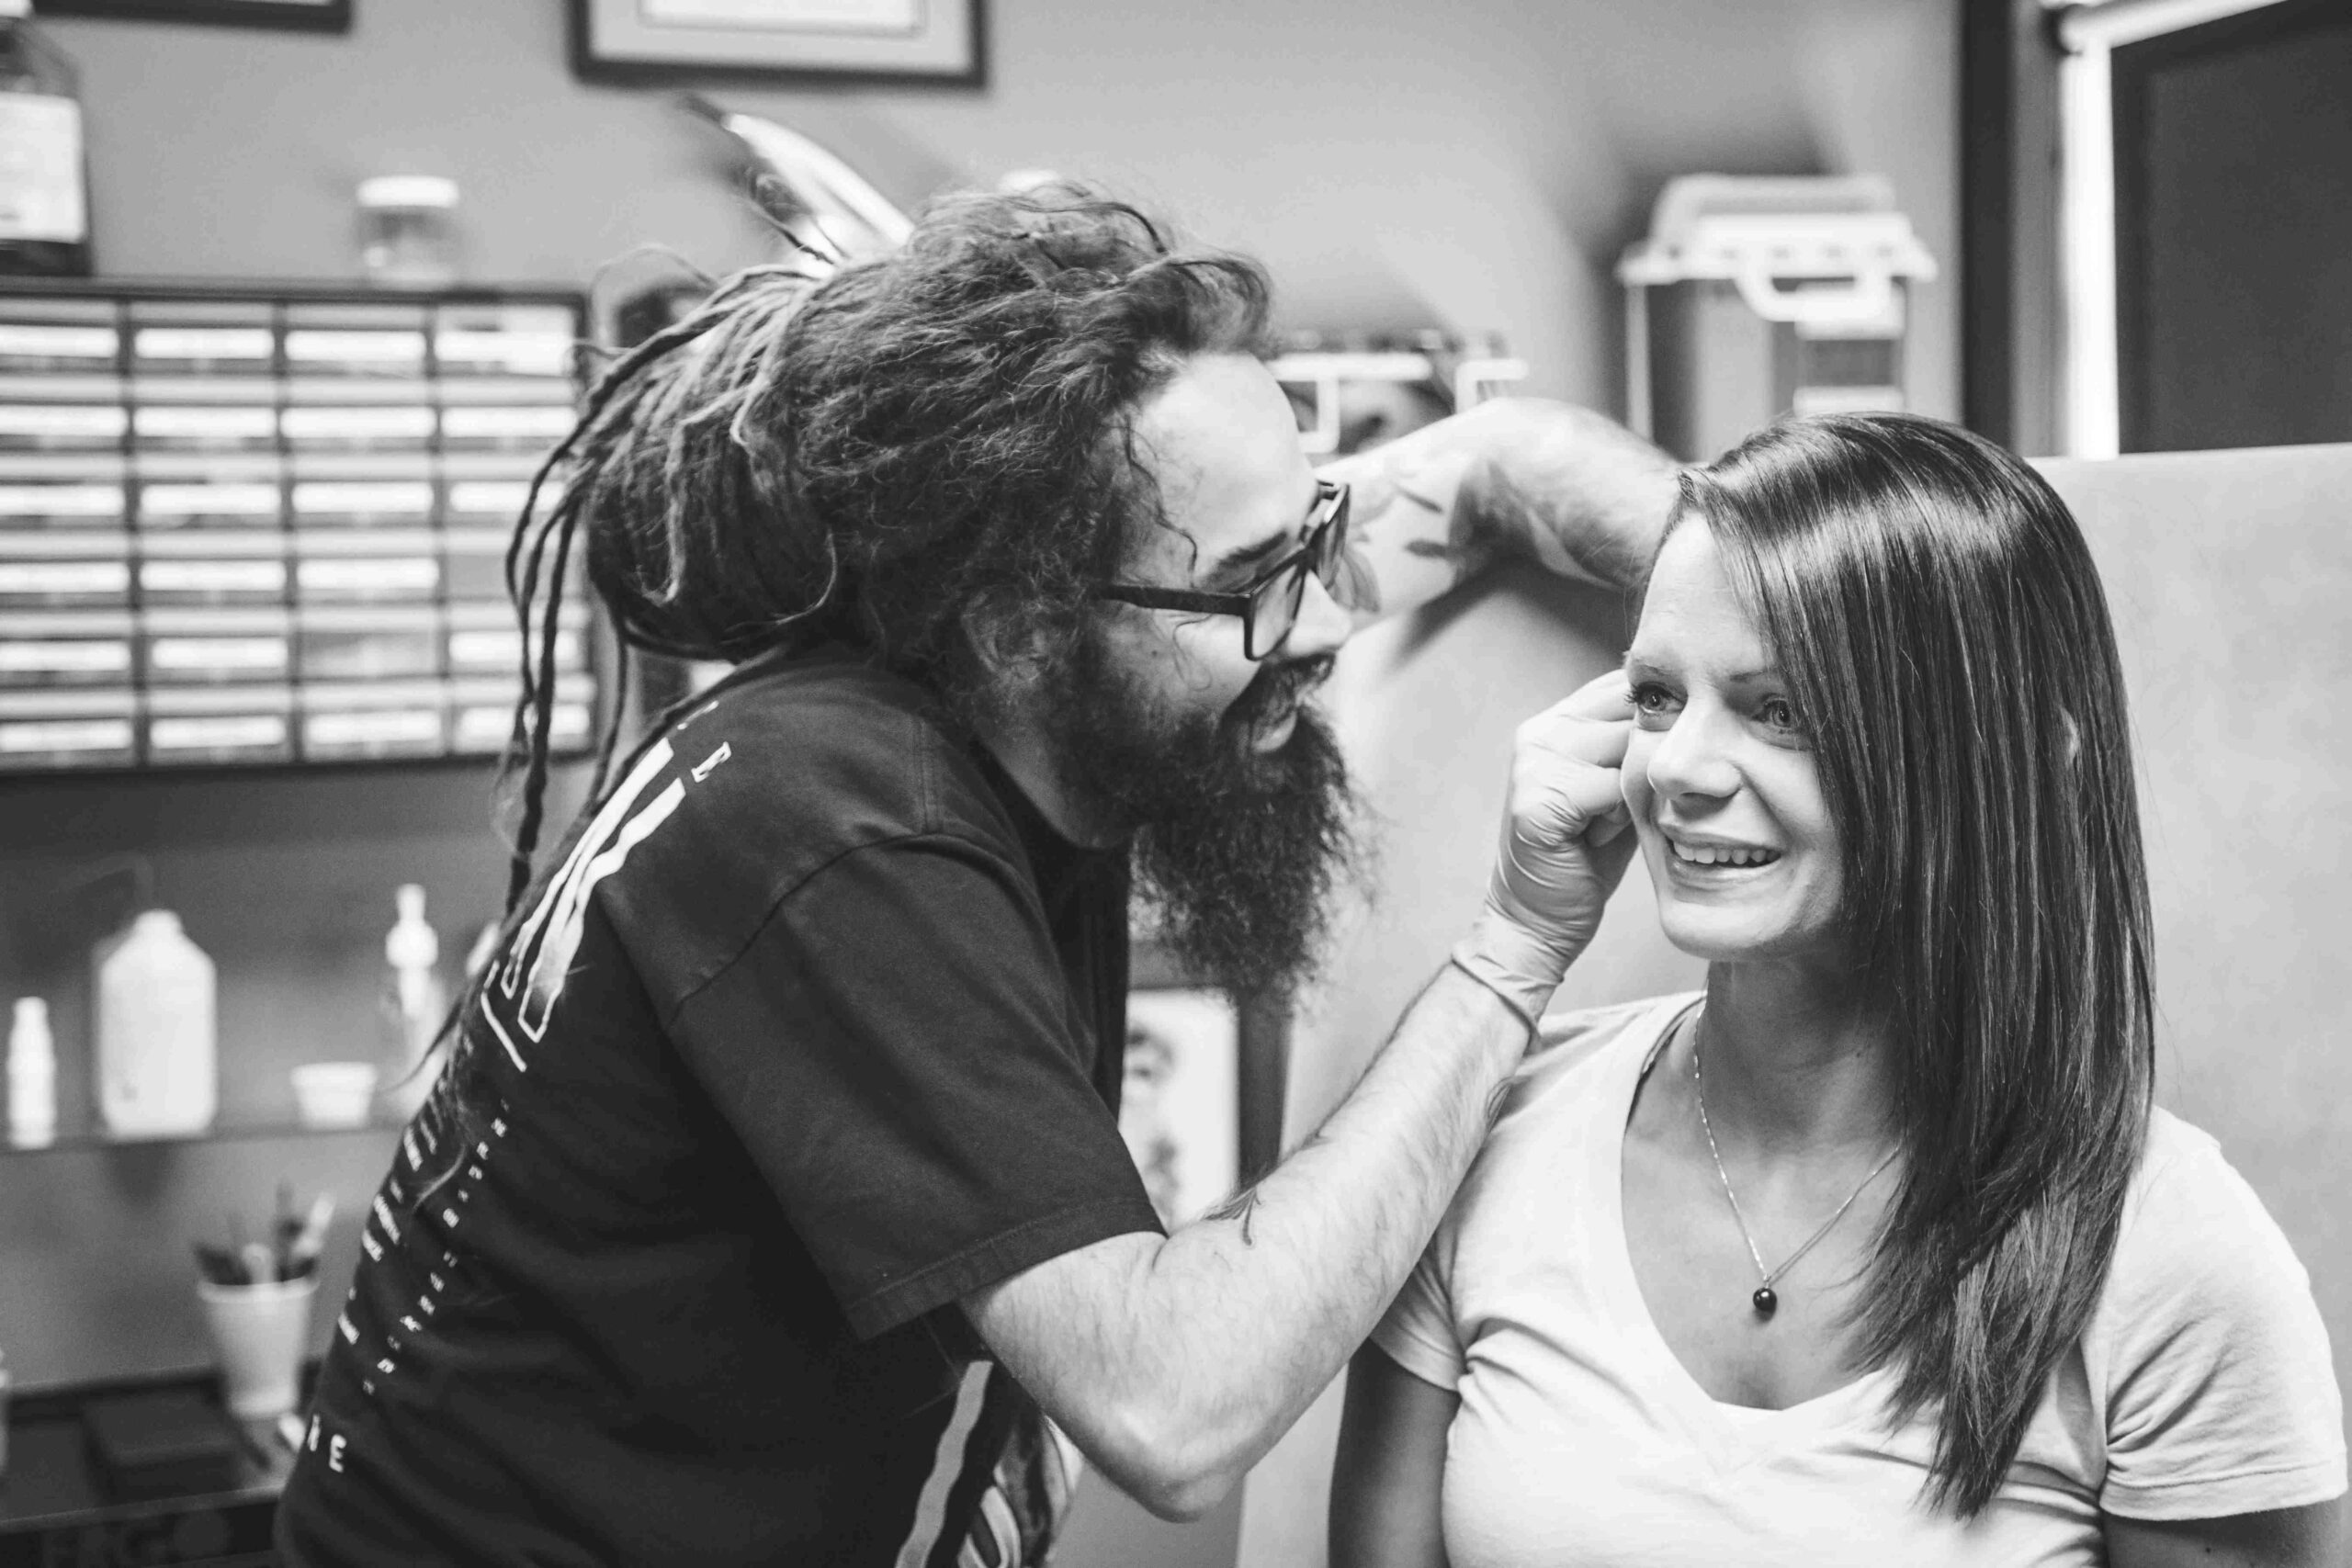 A man is getting a tattoo on a woman's head.